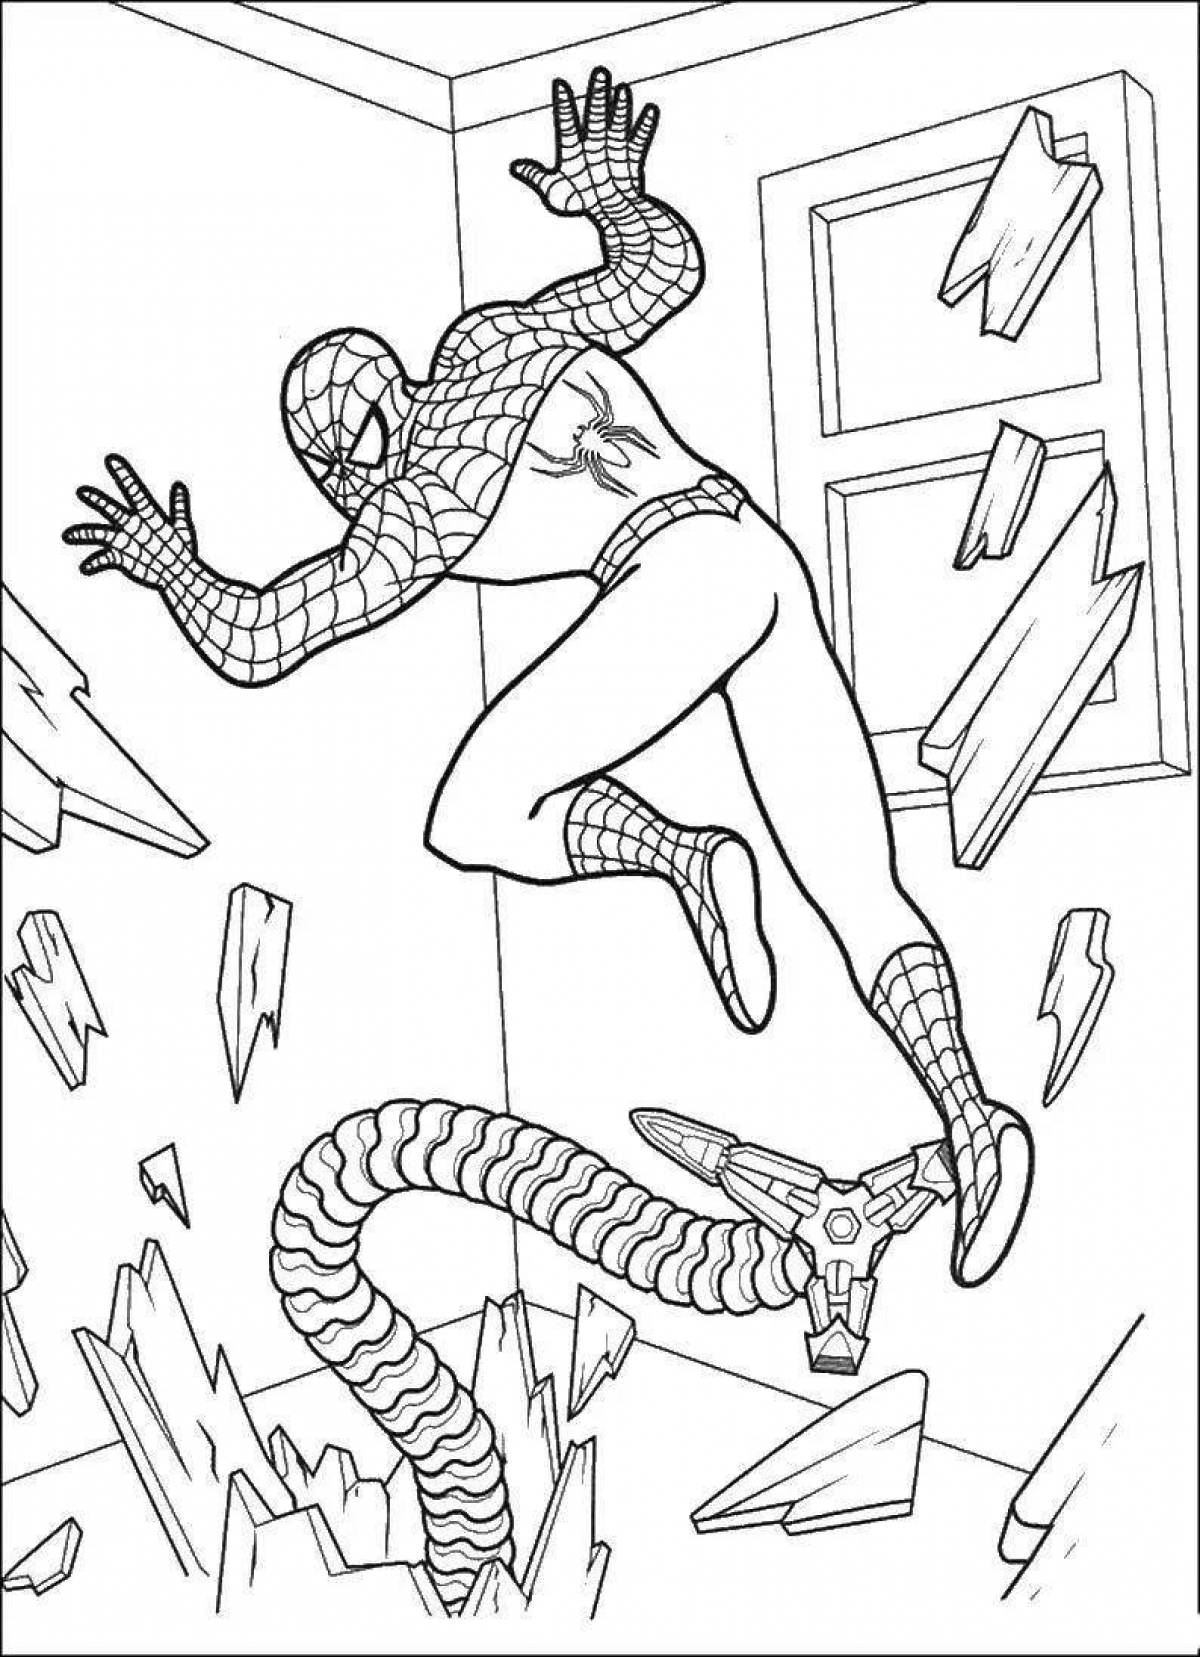 Colorful spiderman cartoon coloring page